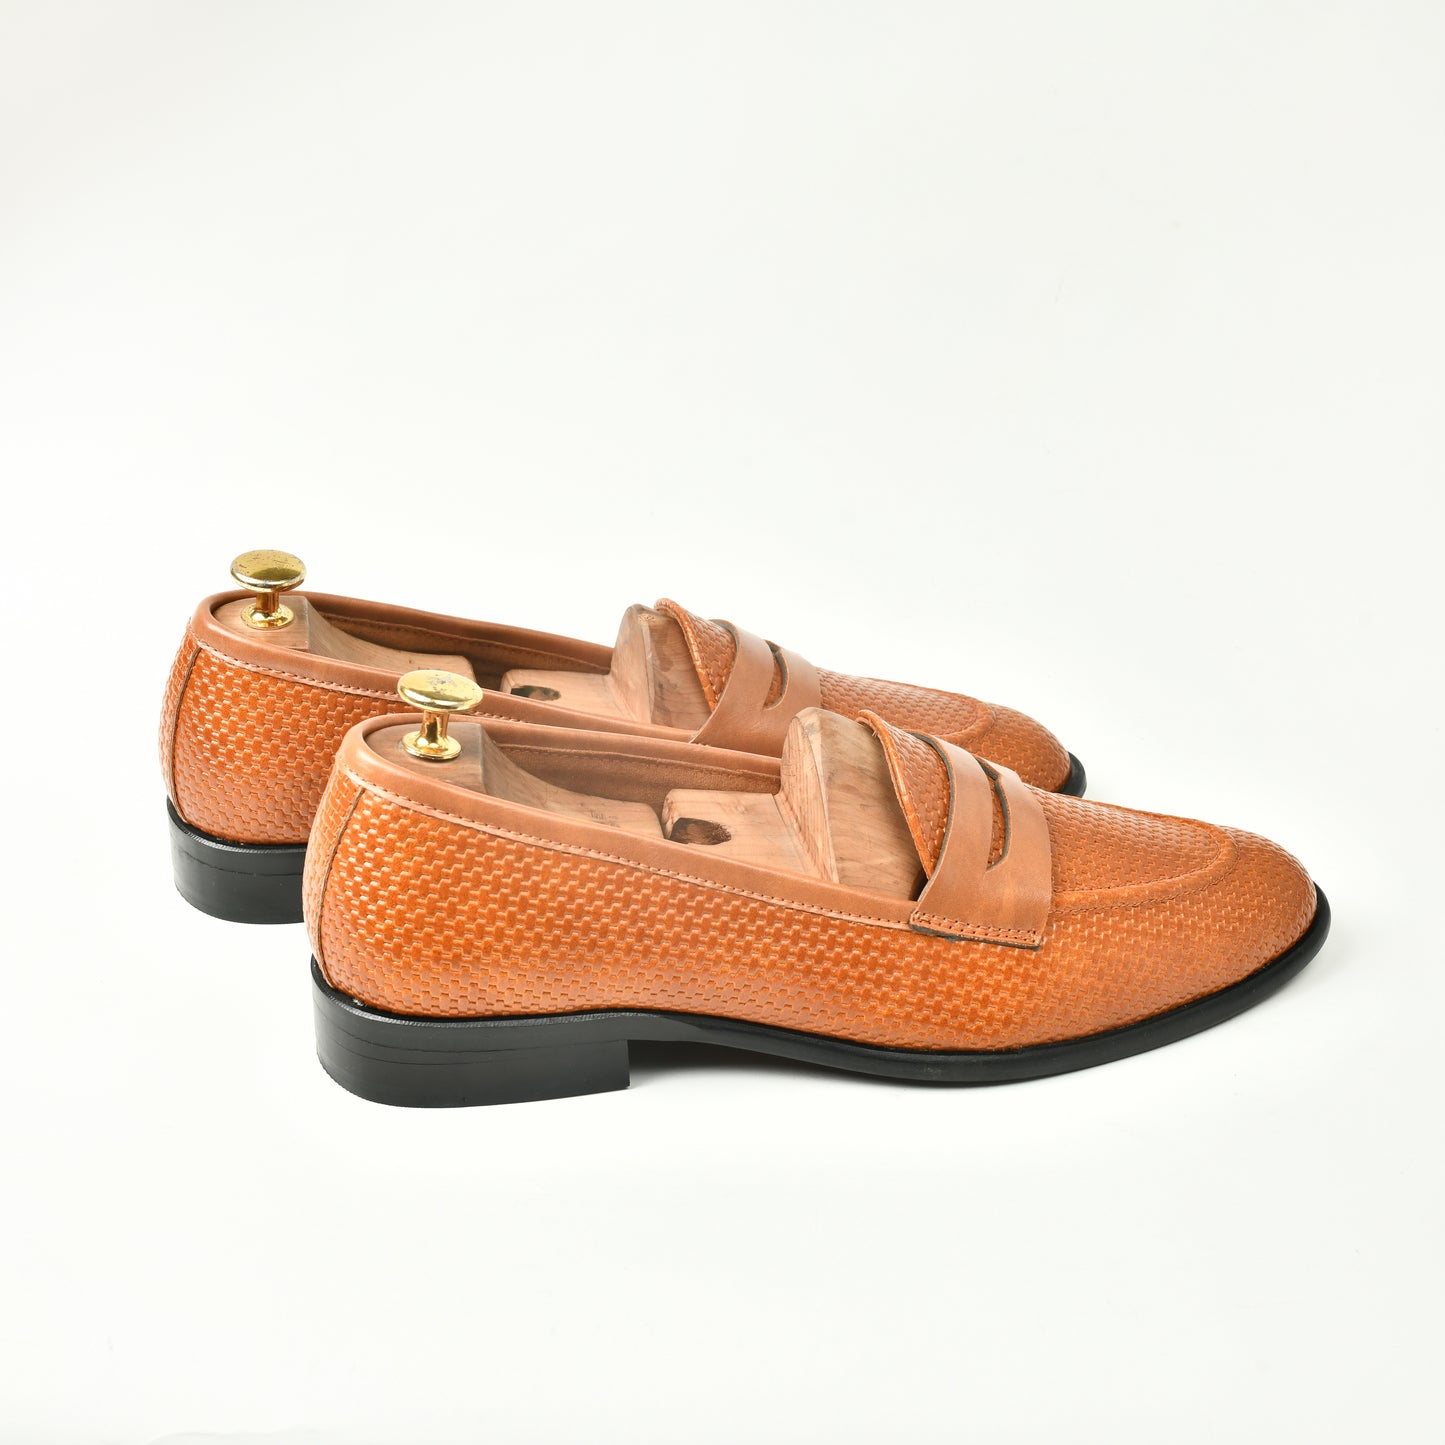 Woven Leather Slip Ons - Tan